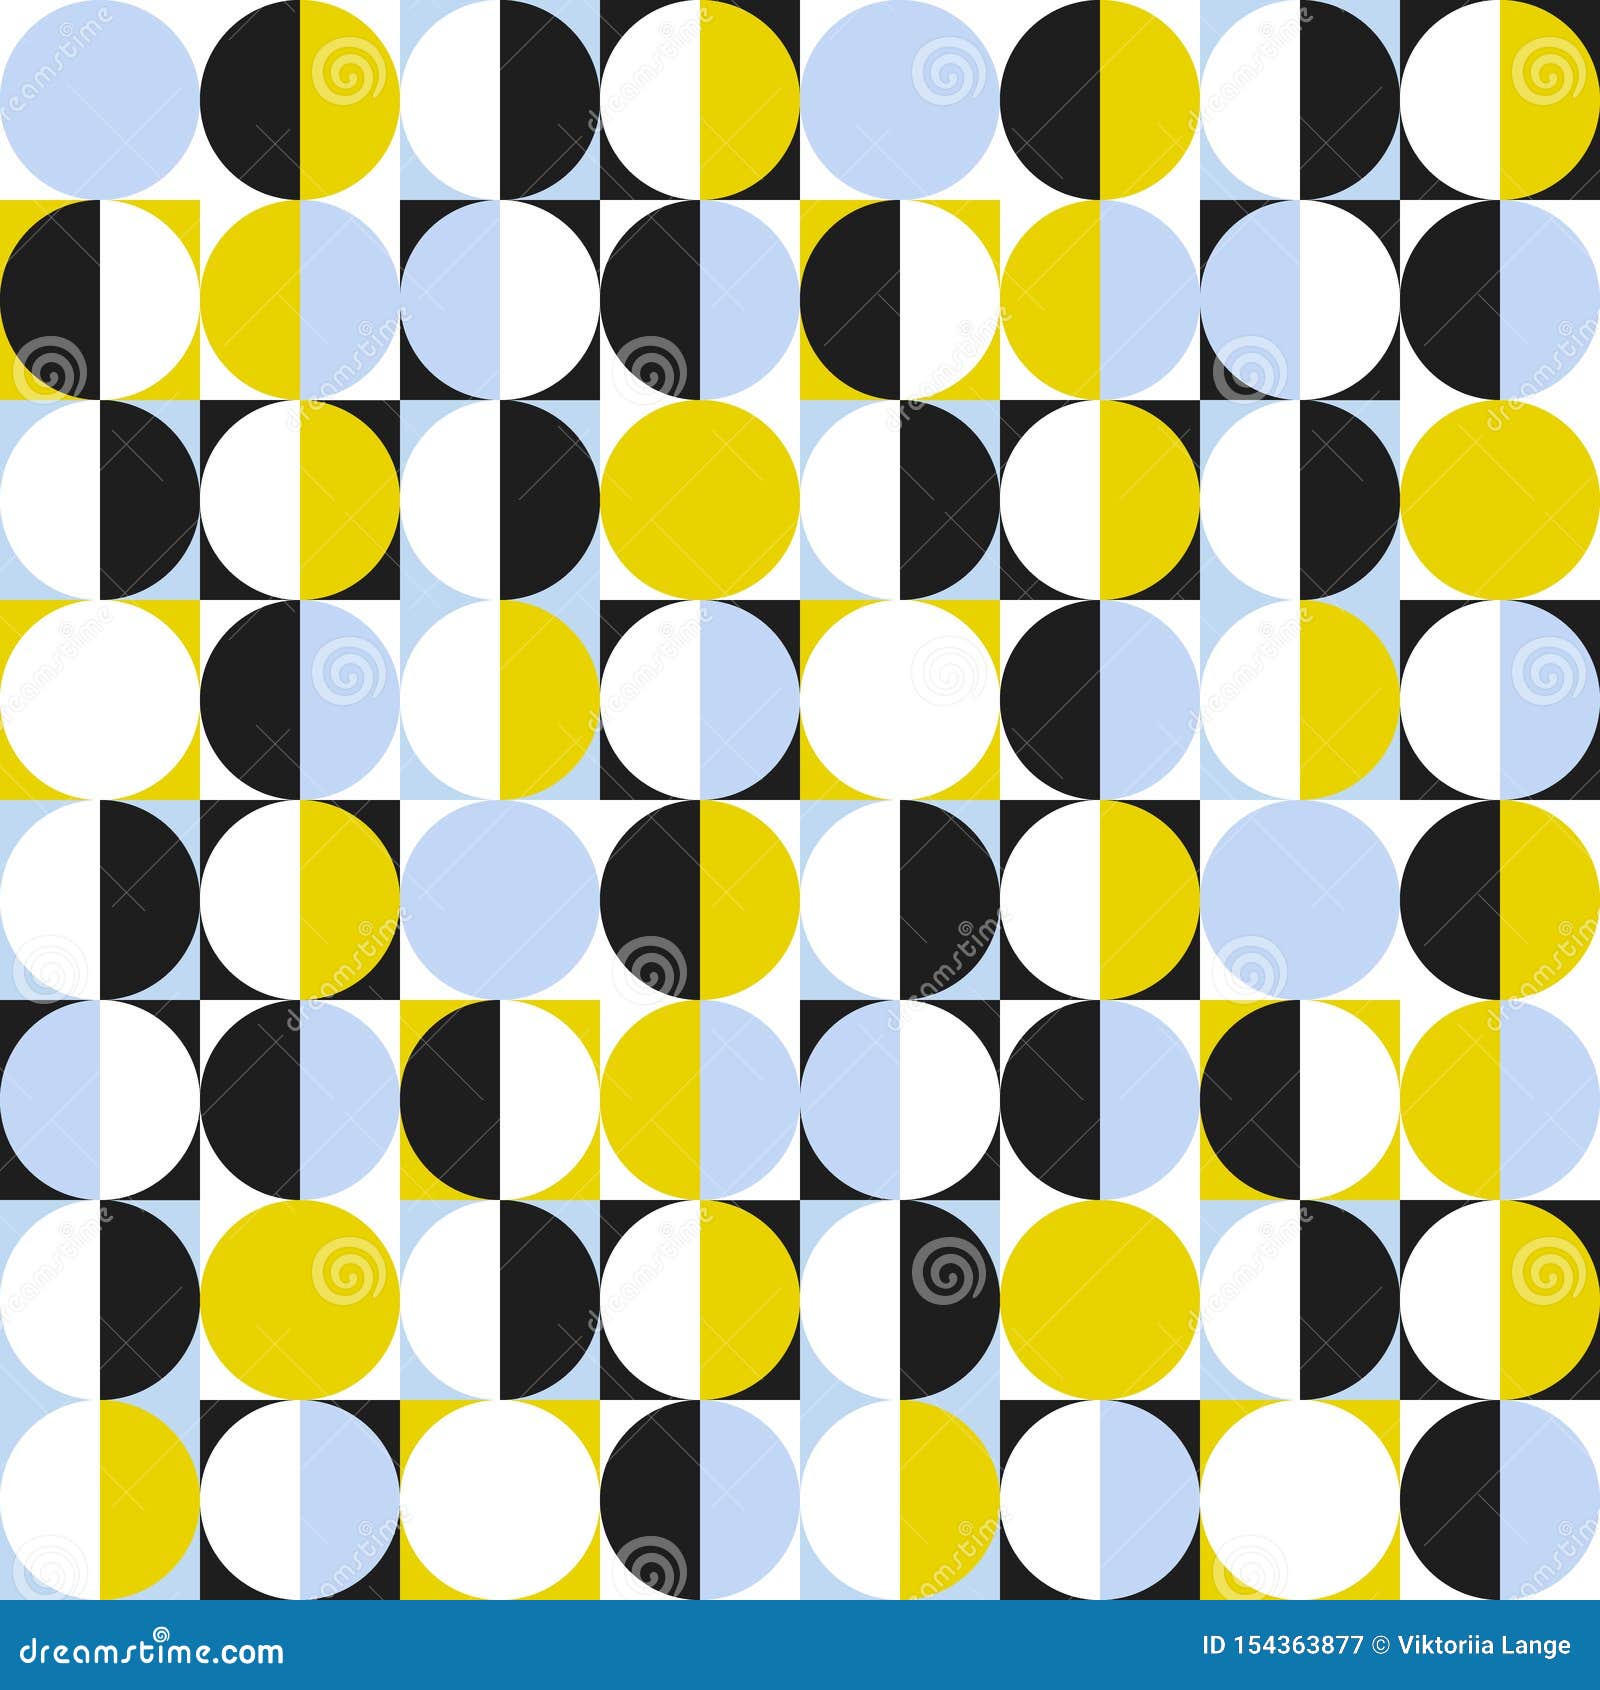 seamless geometric pattern with circles and semicircles.